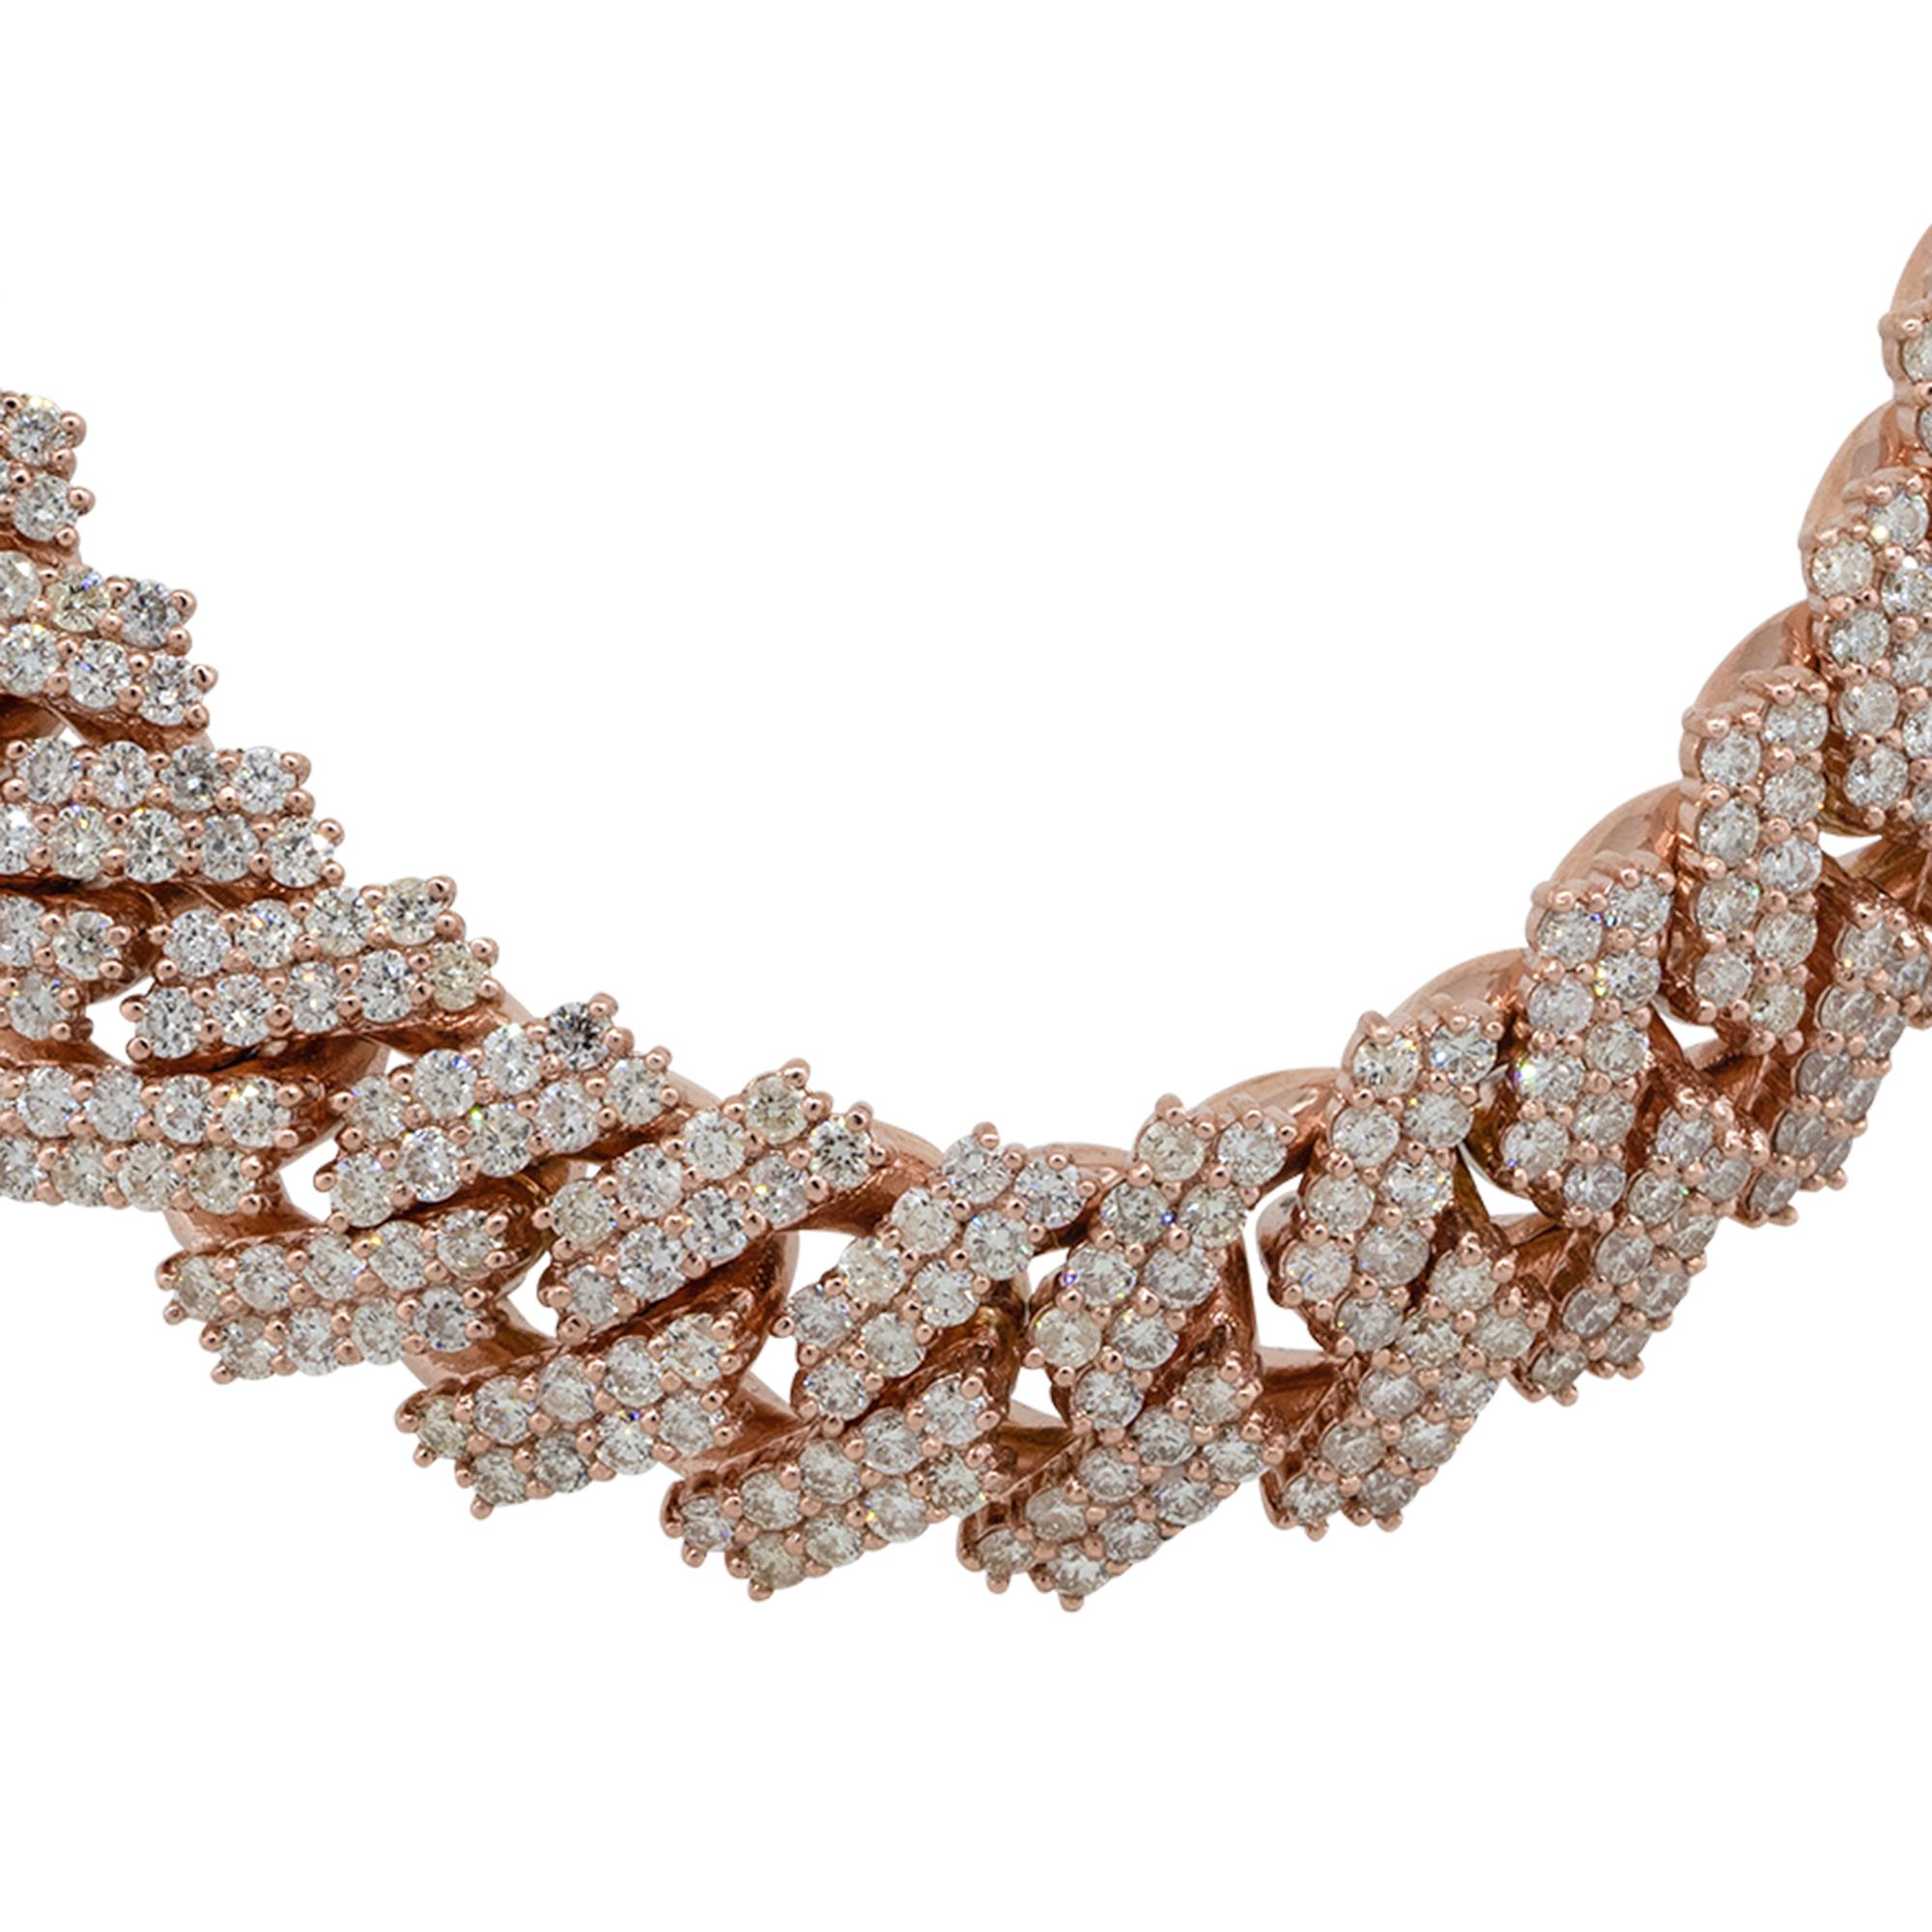 Material: 10k Rose Gold
Diamond Details: Approx. 49.8ctw of round cut Diamonds. Diamonds are G/H in color and VS in clarity
Measurements: Necklace measures 22